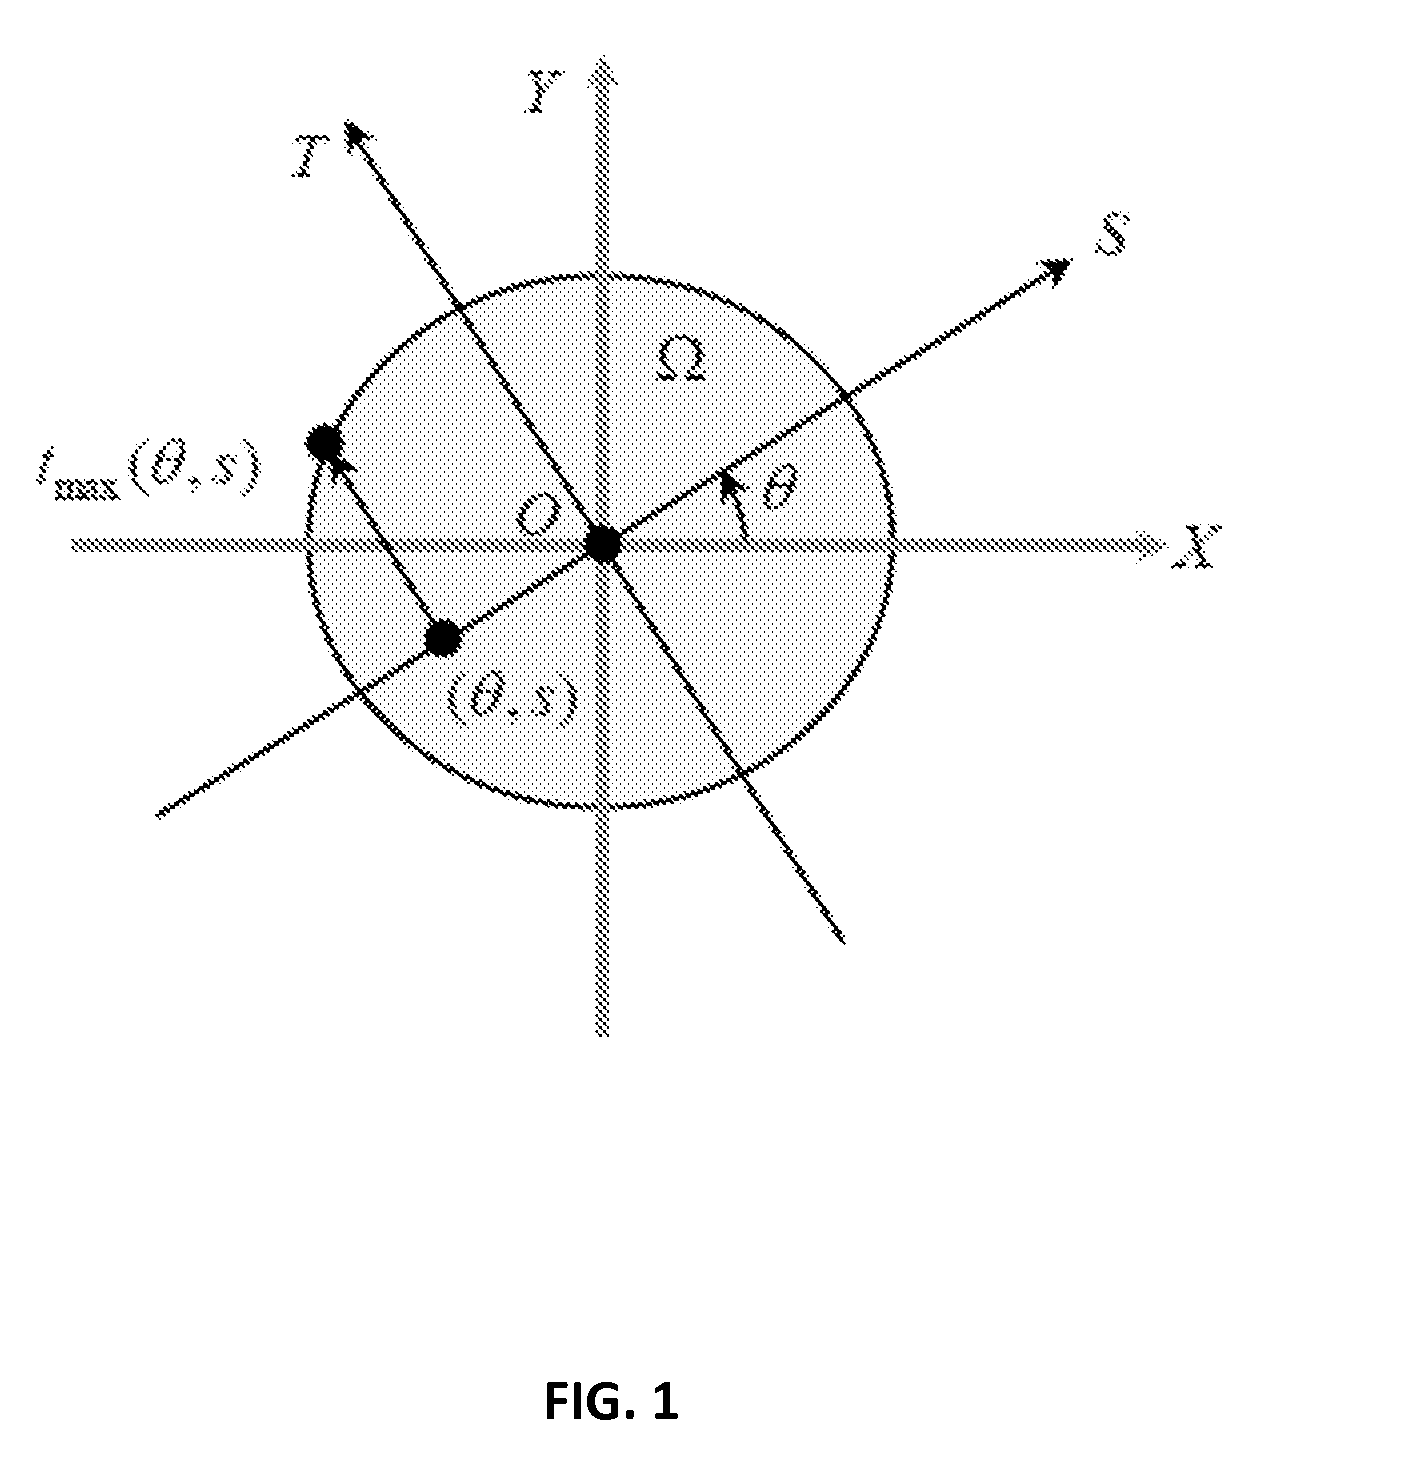 Methods for improved single photon emission computed tomography using exact and stable region of interest reconstructions